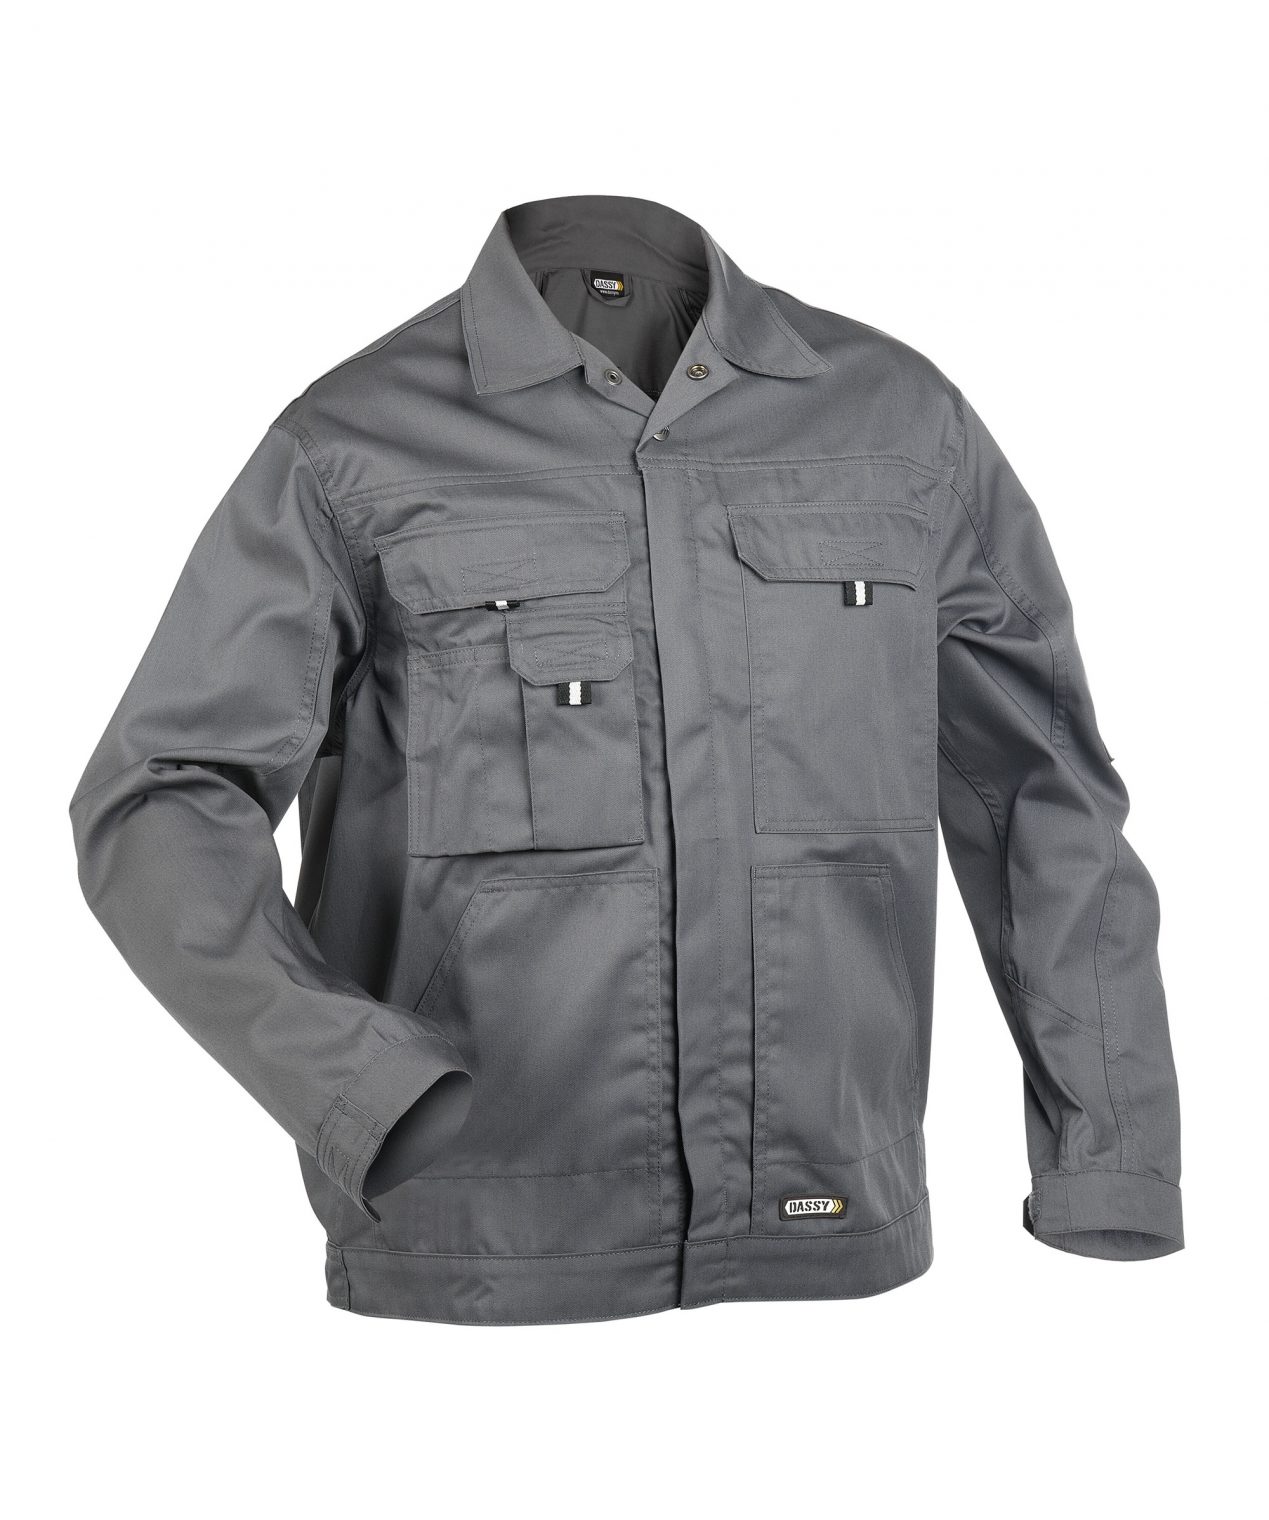 locarno work jacket cement grey front